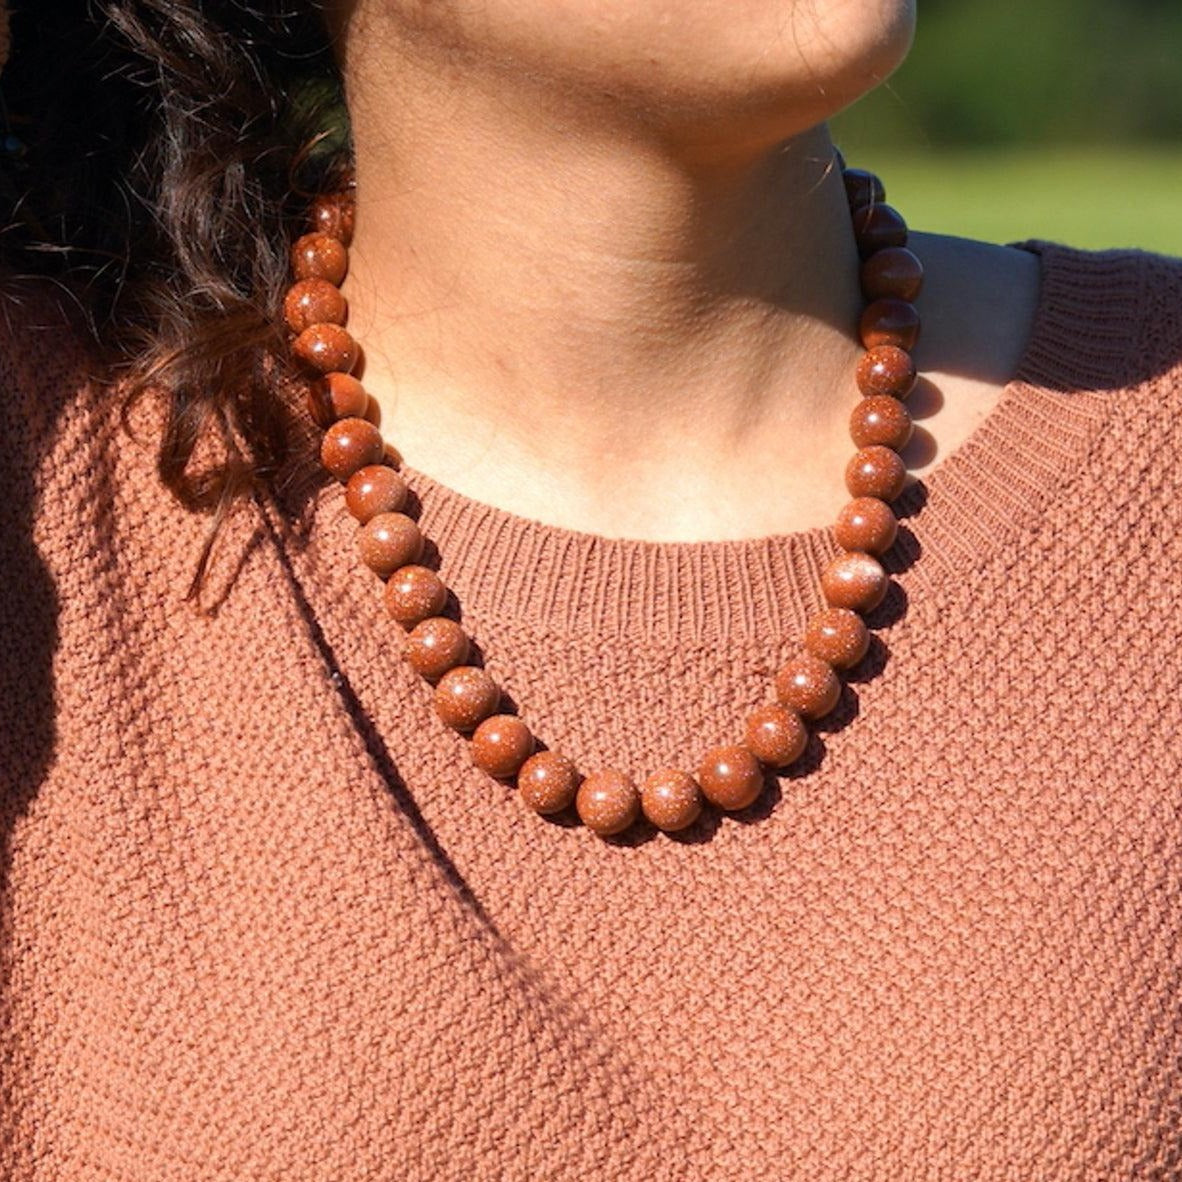 Goldstone sparkling stone necklace for every look at anyplace